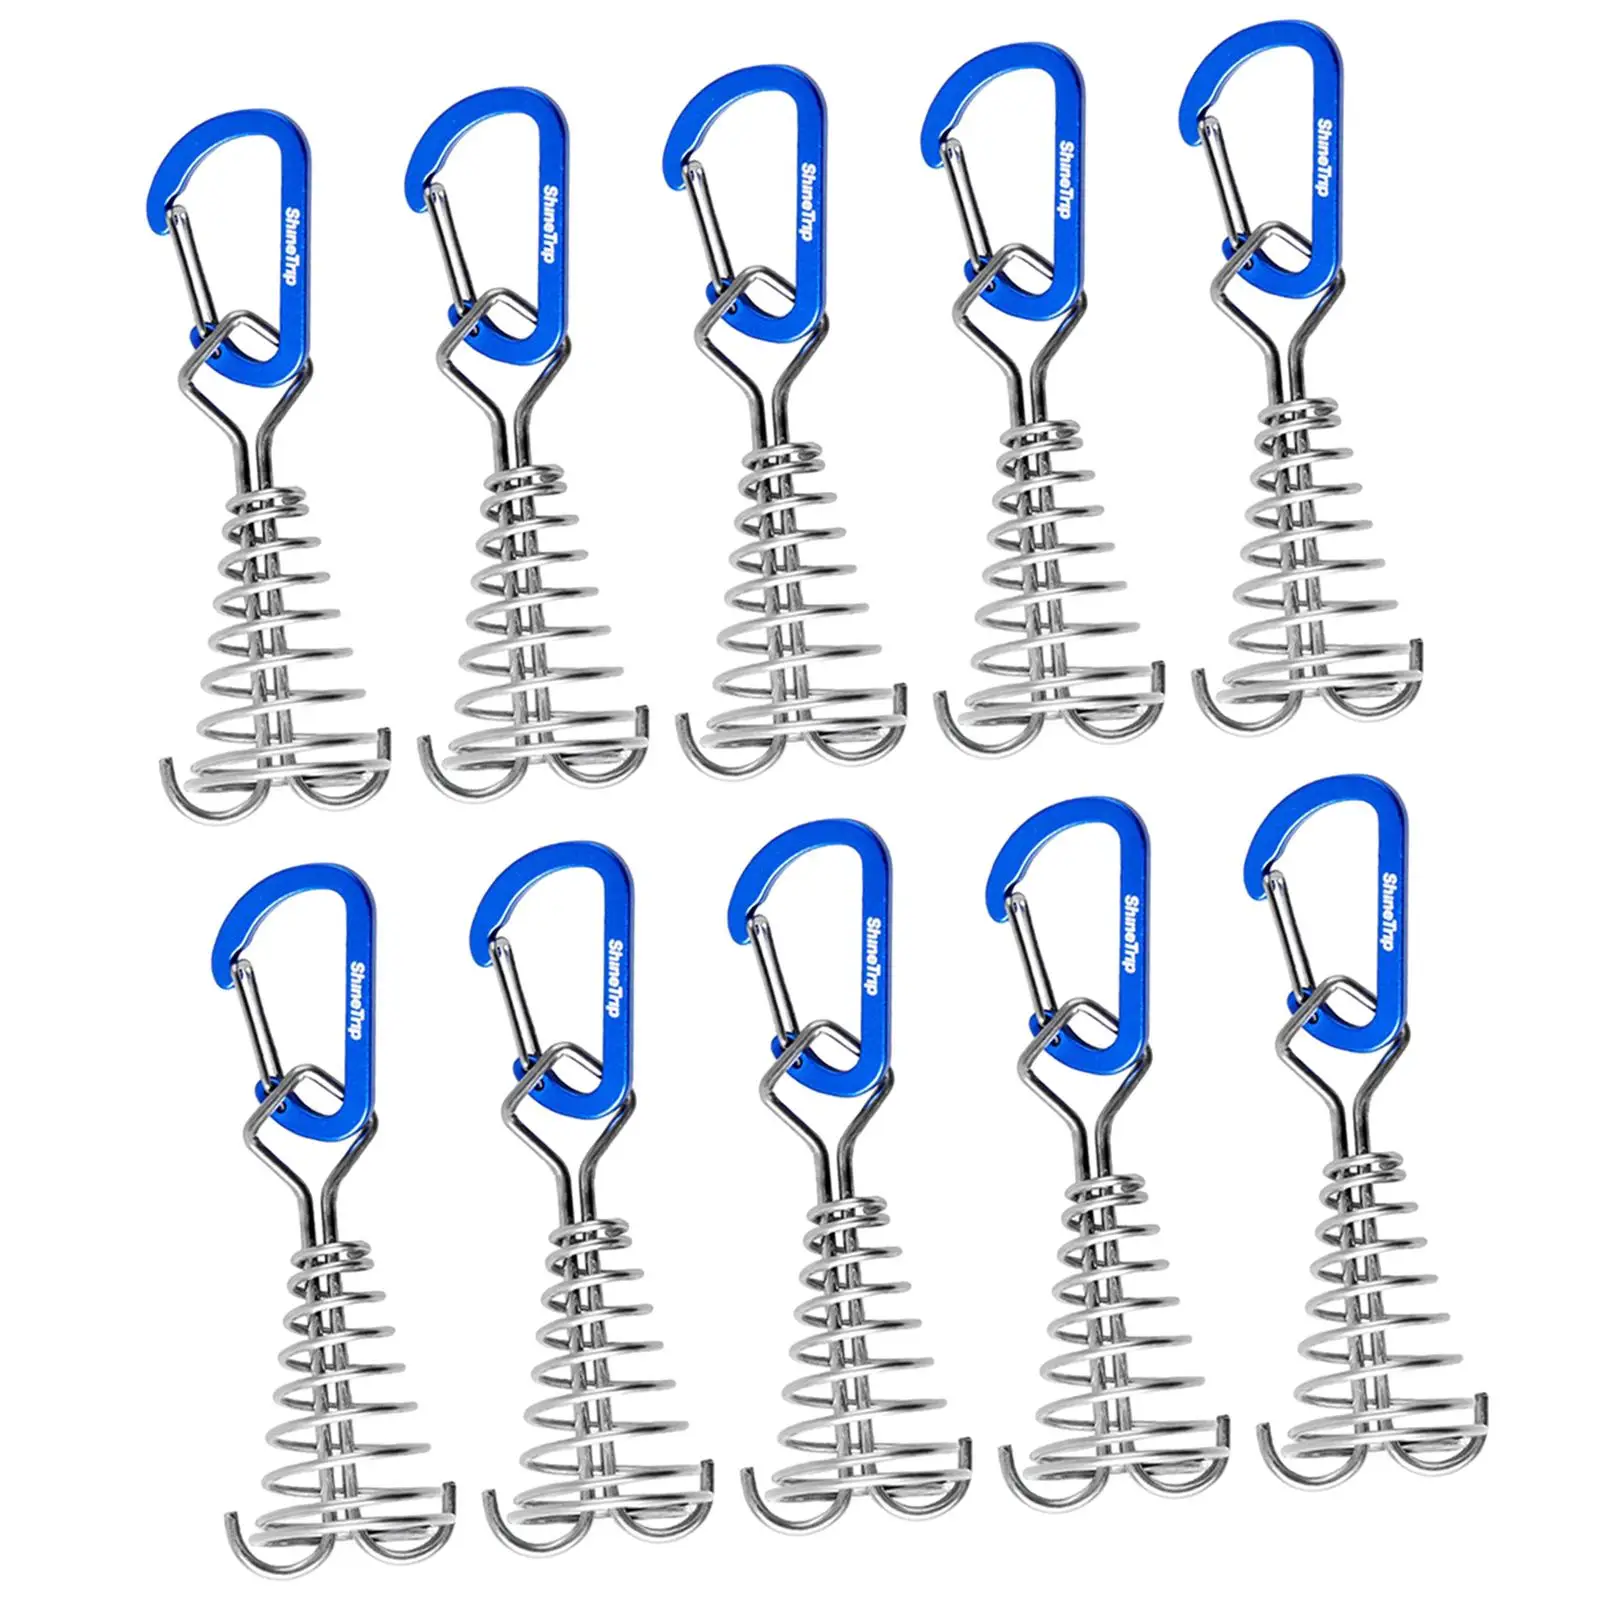 10 Pieces Deck Anchor Pegs Tent Rope Tightener with Spring Buckle for Outdoor